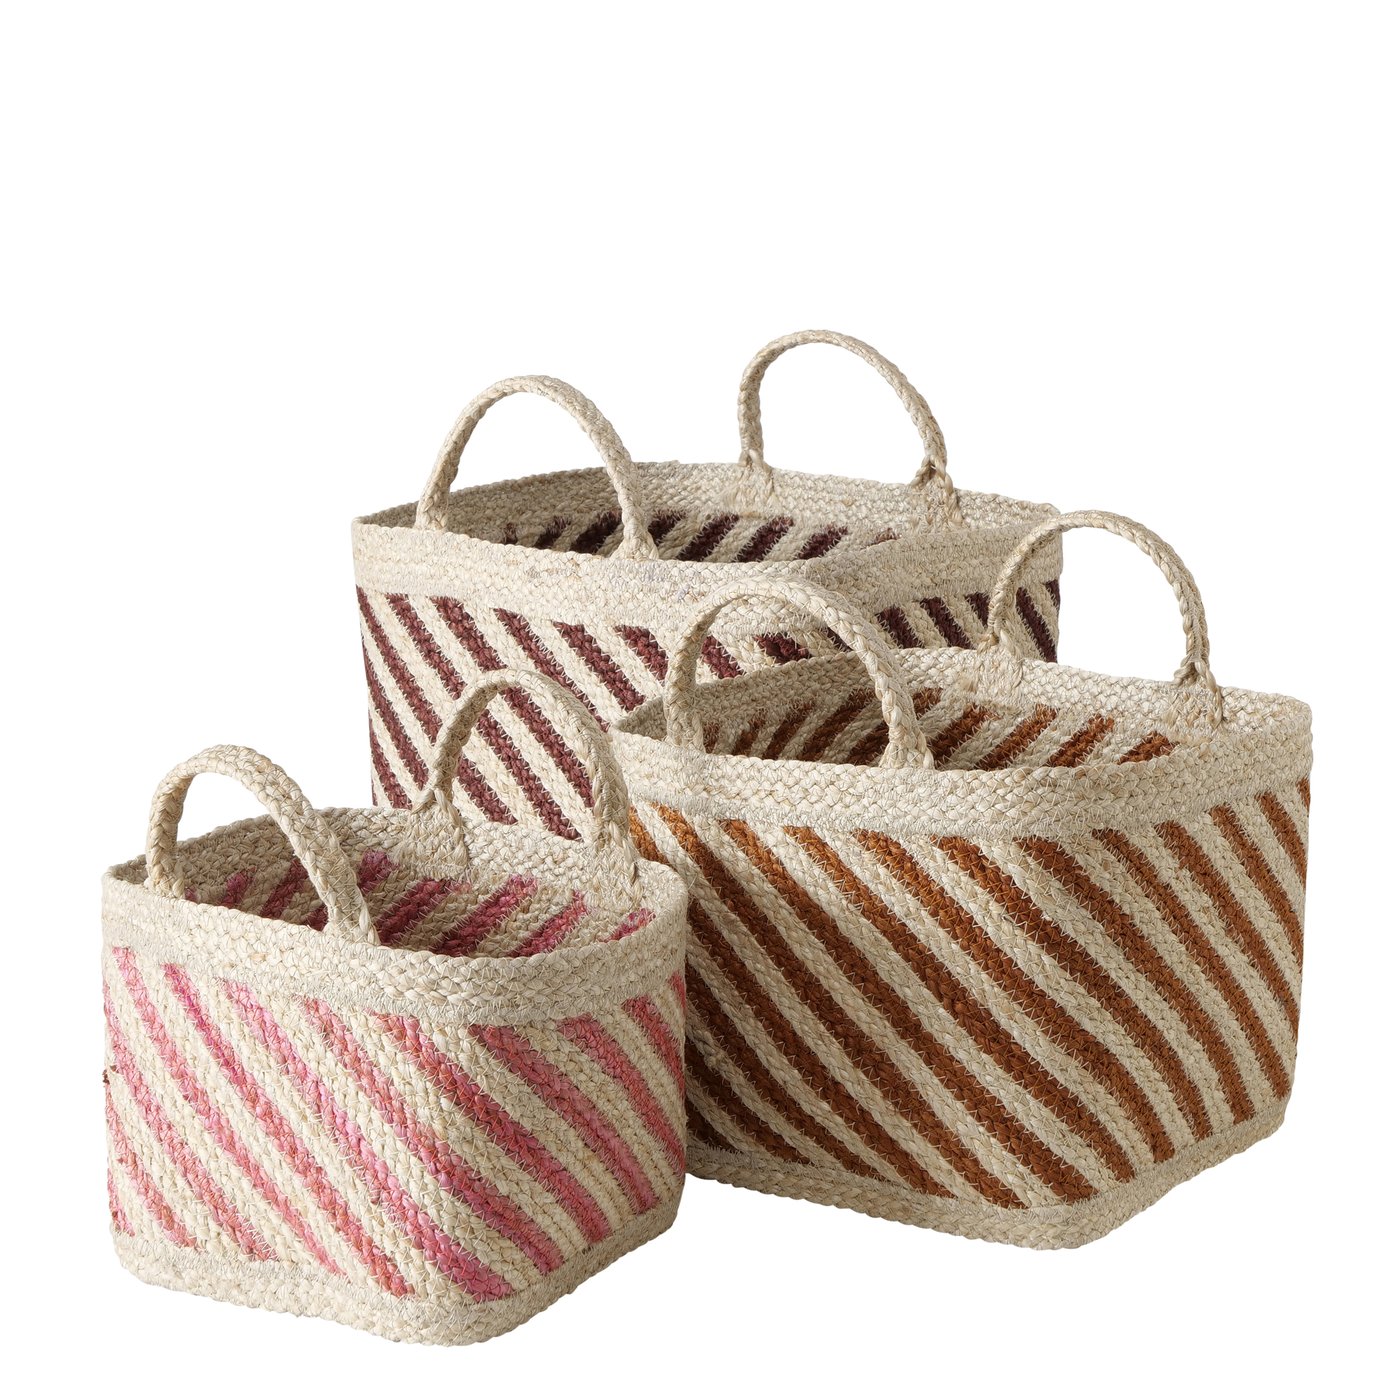 &Quirky Magura Basket Set of 3